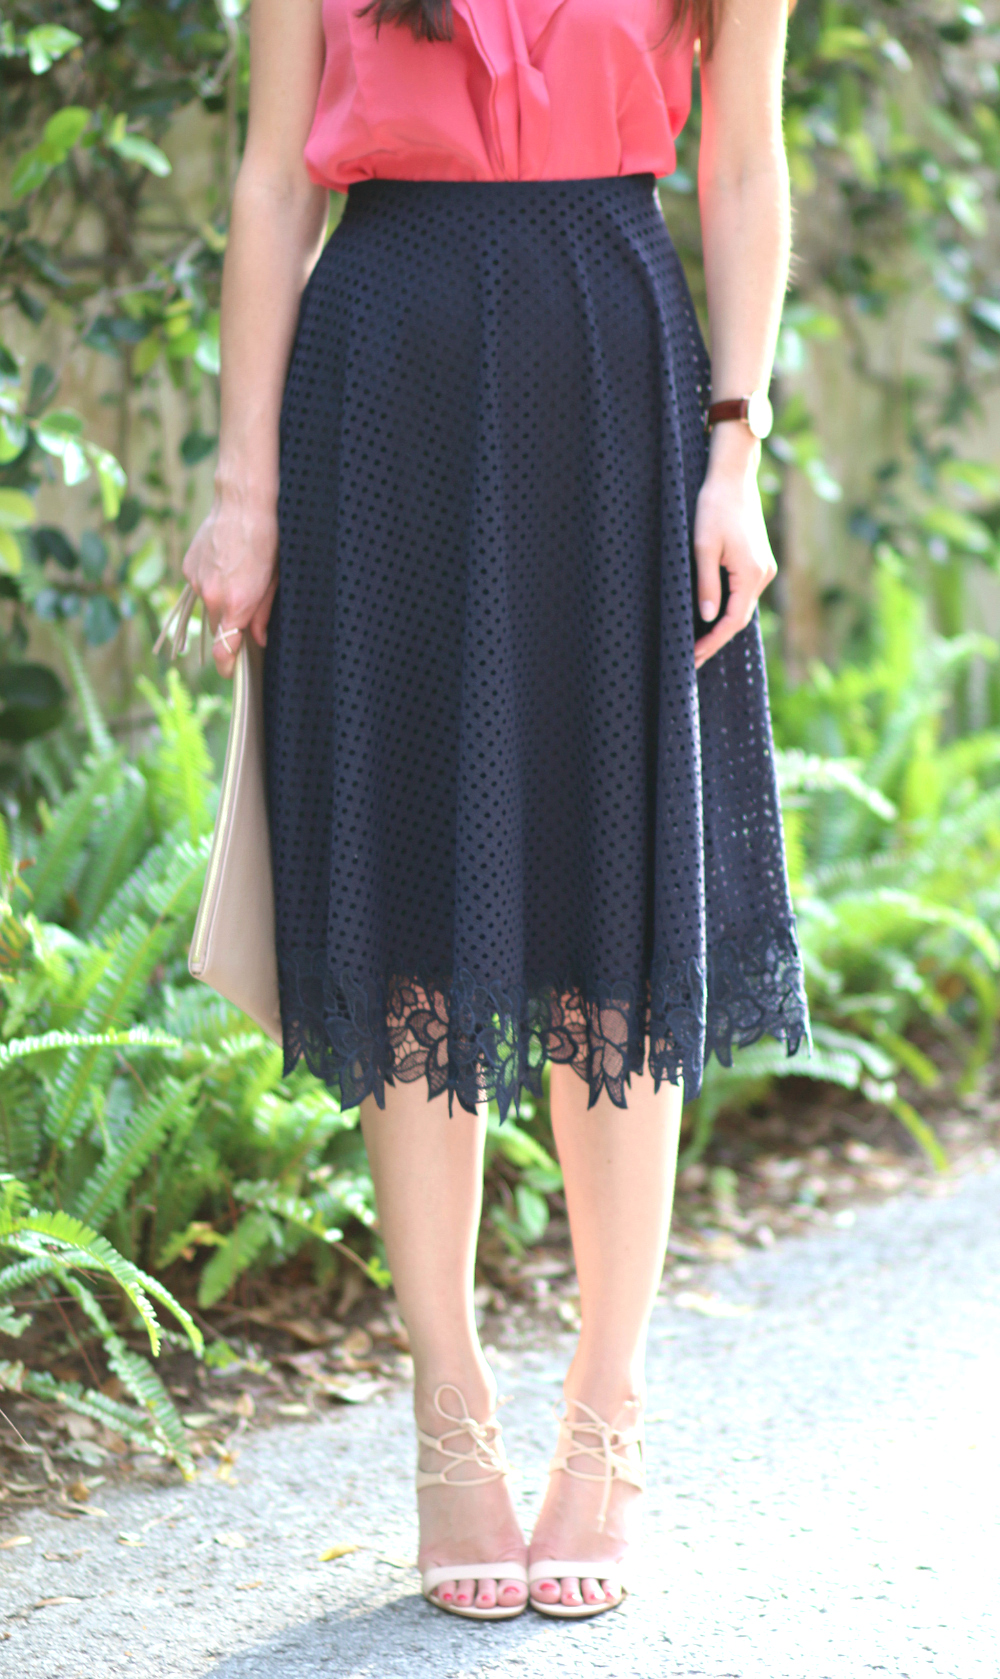 Ann Taylor Skirt, Floral Lace Midi Skirt, Lace Midi Skirt, Lace Swing Skirt, Spring Outfit, Stephanie Ziajka, Diary of a Debutante